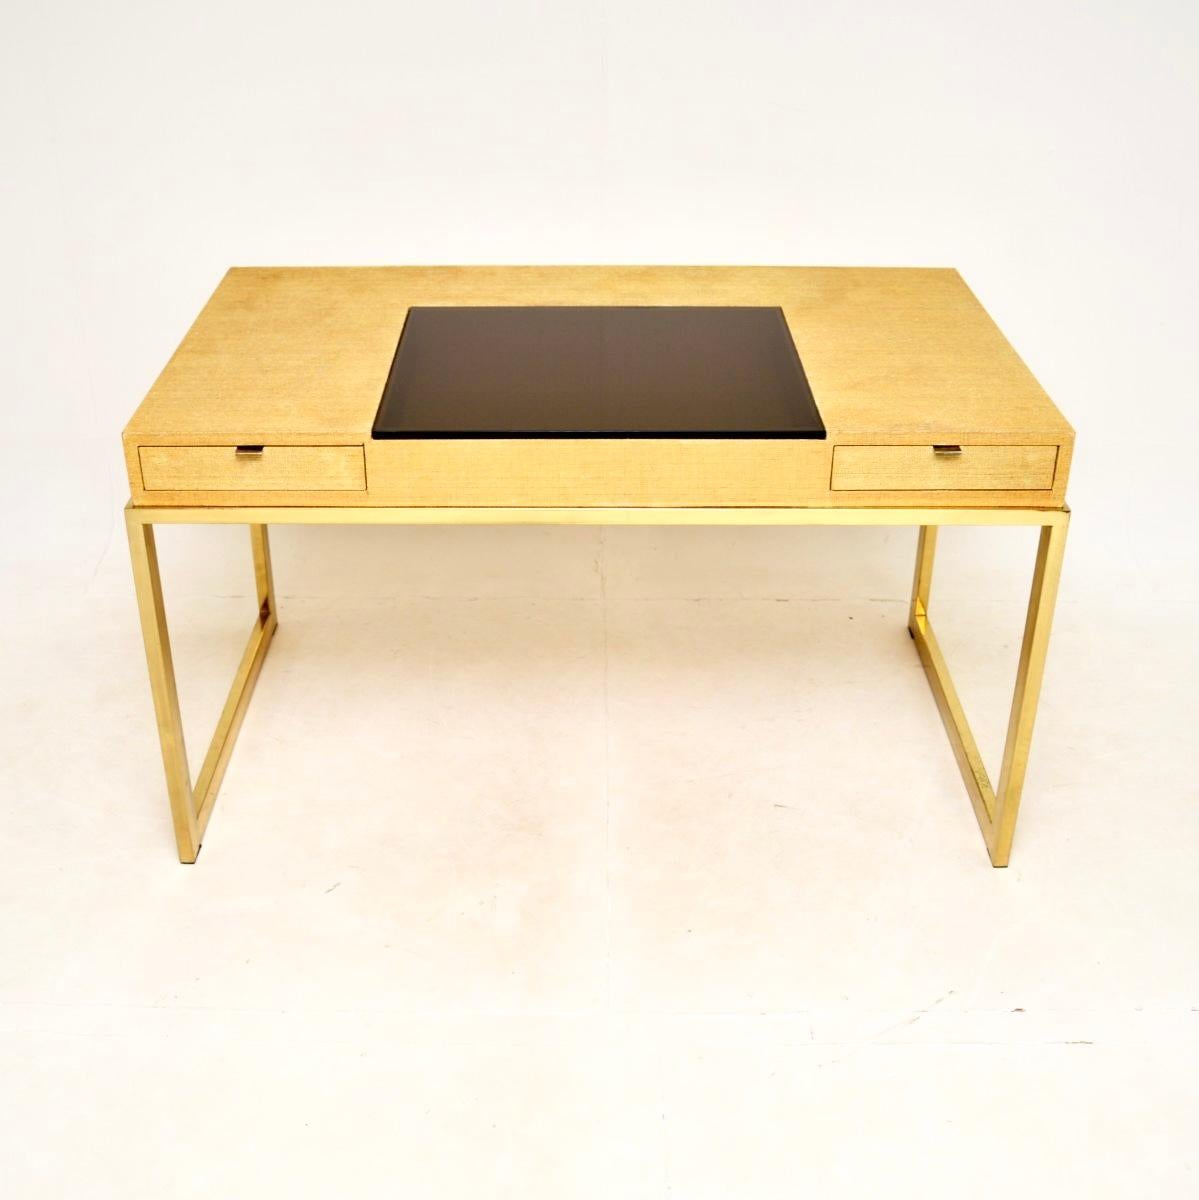 A very stylish and unusual vintage brass and rattan desk. This was made in England, it dates from around the 1970’s.

It is very well made and has a lovely design, with the rattan clad top attached to a brass base. There are two drawers and in the